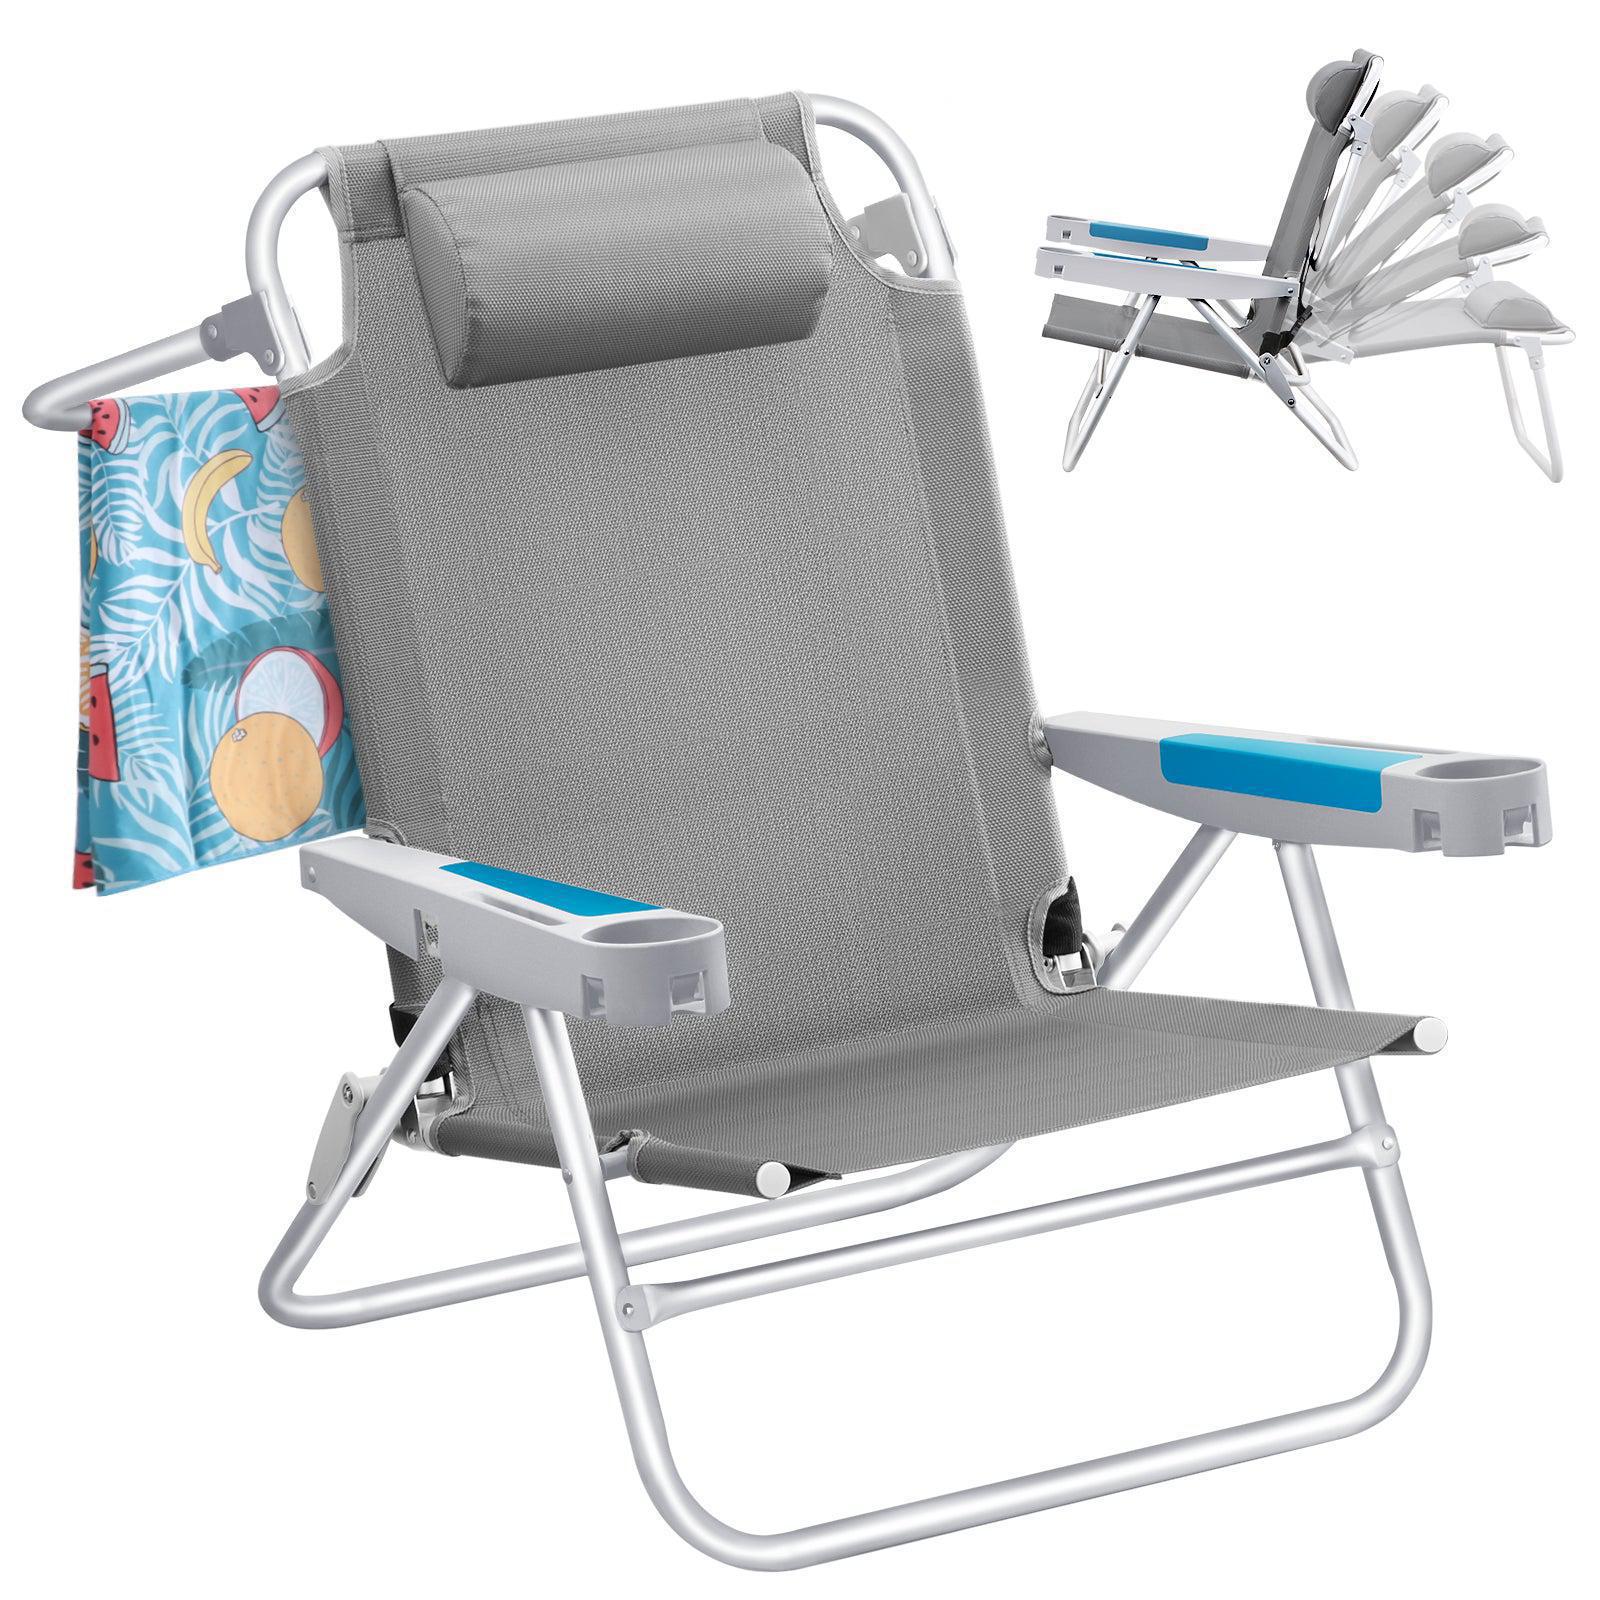 Extra-Wide Backpack Chair | ICECO-www.icecofreezer.com